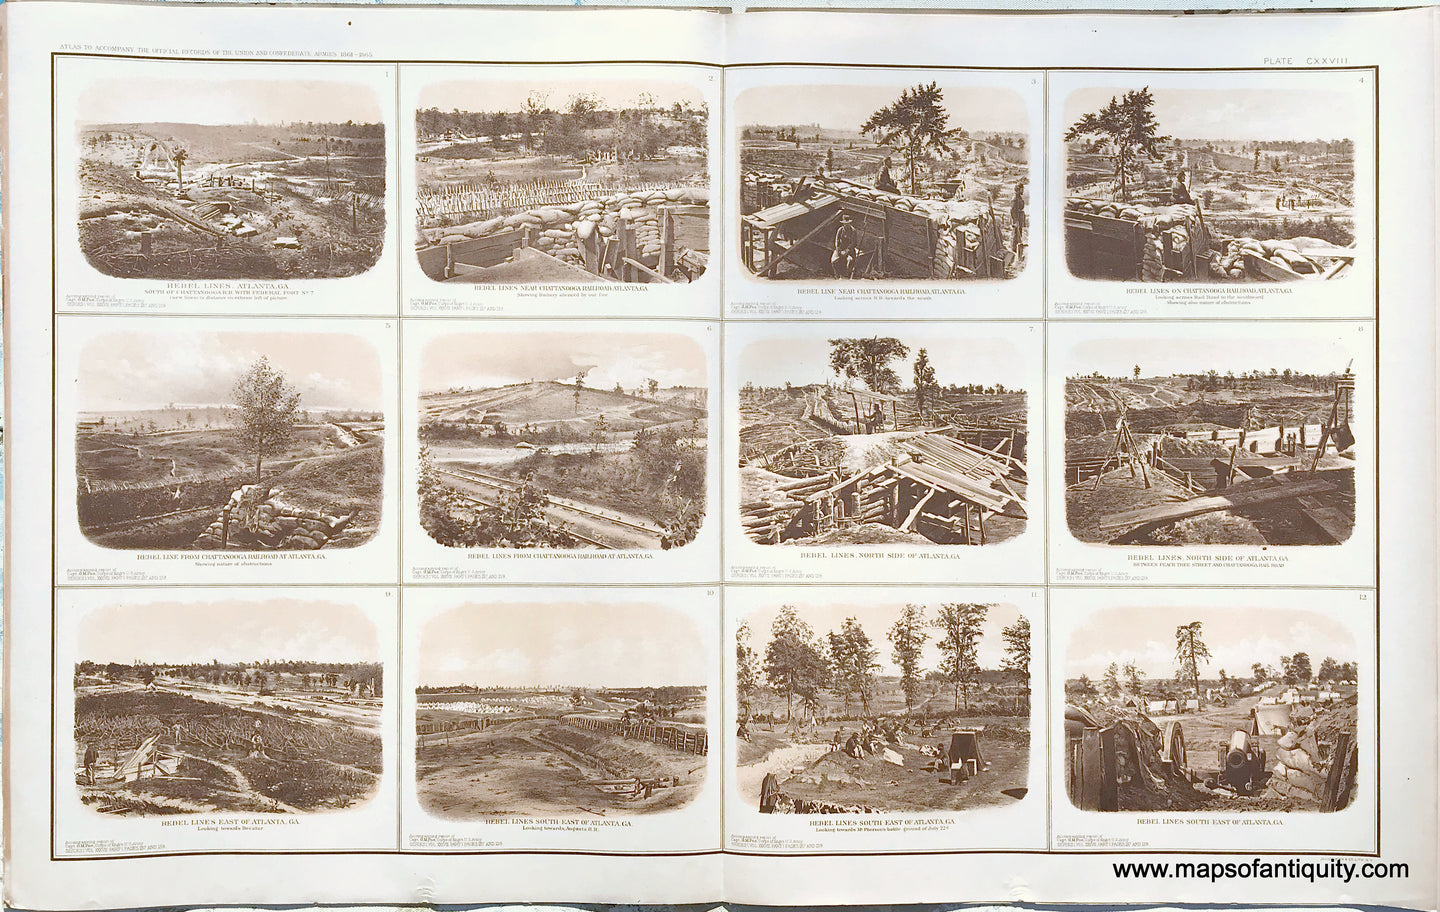 Antique-Lithograph-Print-Plate-128.-Twelve-photographic-views-of-Rebel-Lines-in-the-vicinity-of-Atlanta-Ga.-1894-US-War-Dept.-Civil-War-Civil-War-1800s-19th-century-Maps-of-Antiquity